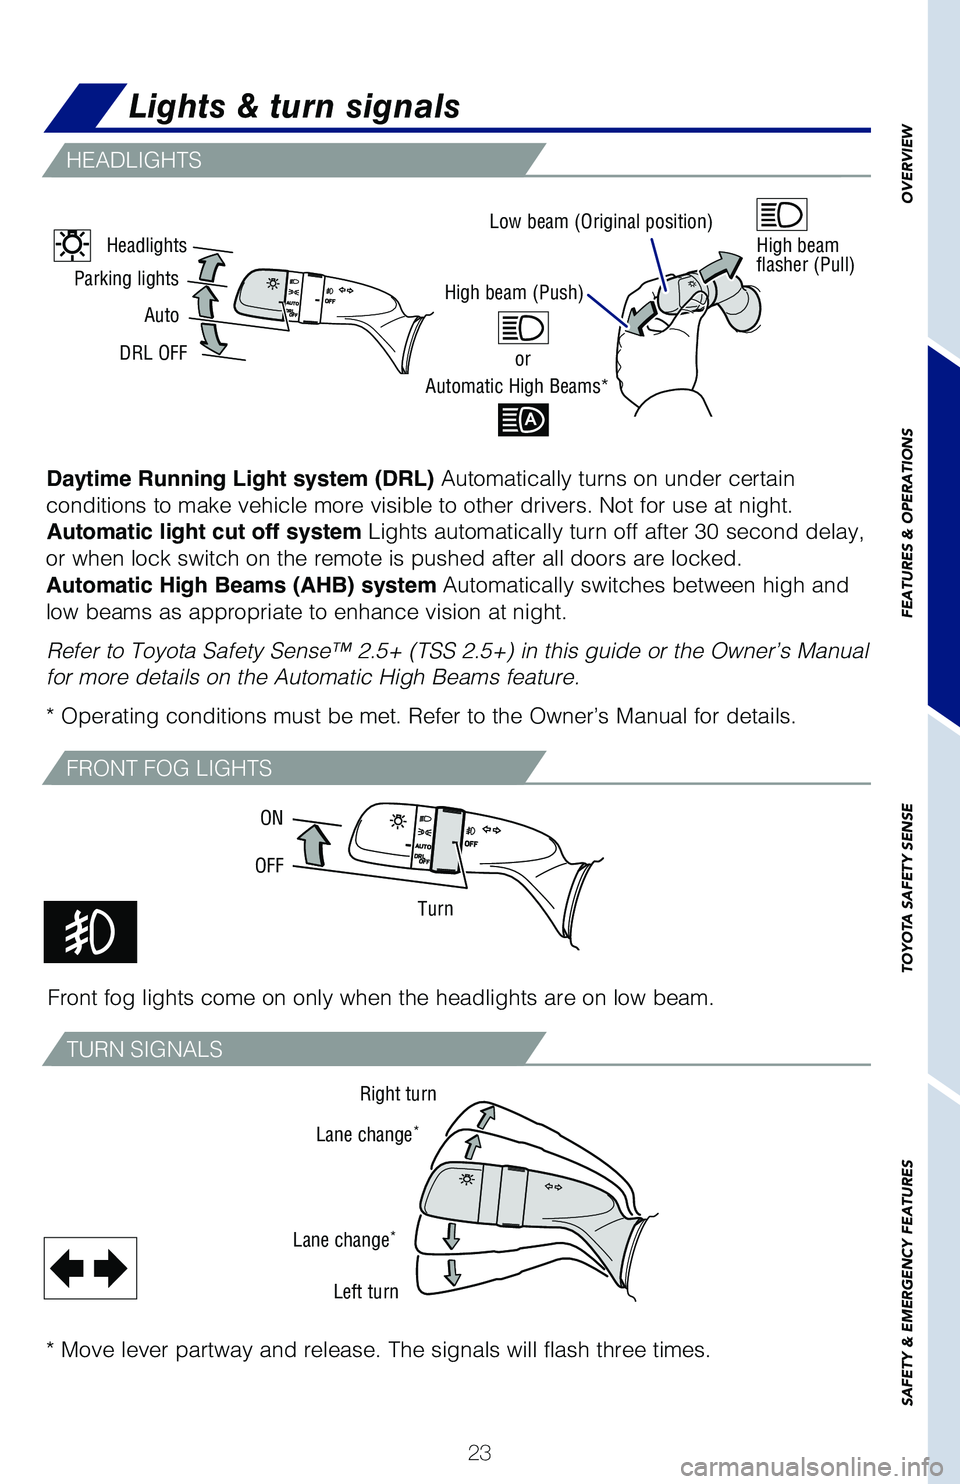 TOYOTA HIGHLANDER HYBRID 2021  Owners Manual (in English) 23
OVERVIEW
FEATURES & OPERATIONS
TOYOTA SAFETY SENSE
SAFETY & EMERGENCY FEATURES
or
Automatic High Beams*
High beam (Push)
Front fog lights come on only when the headlights are on low beam.
Daytime R